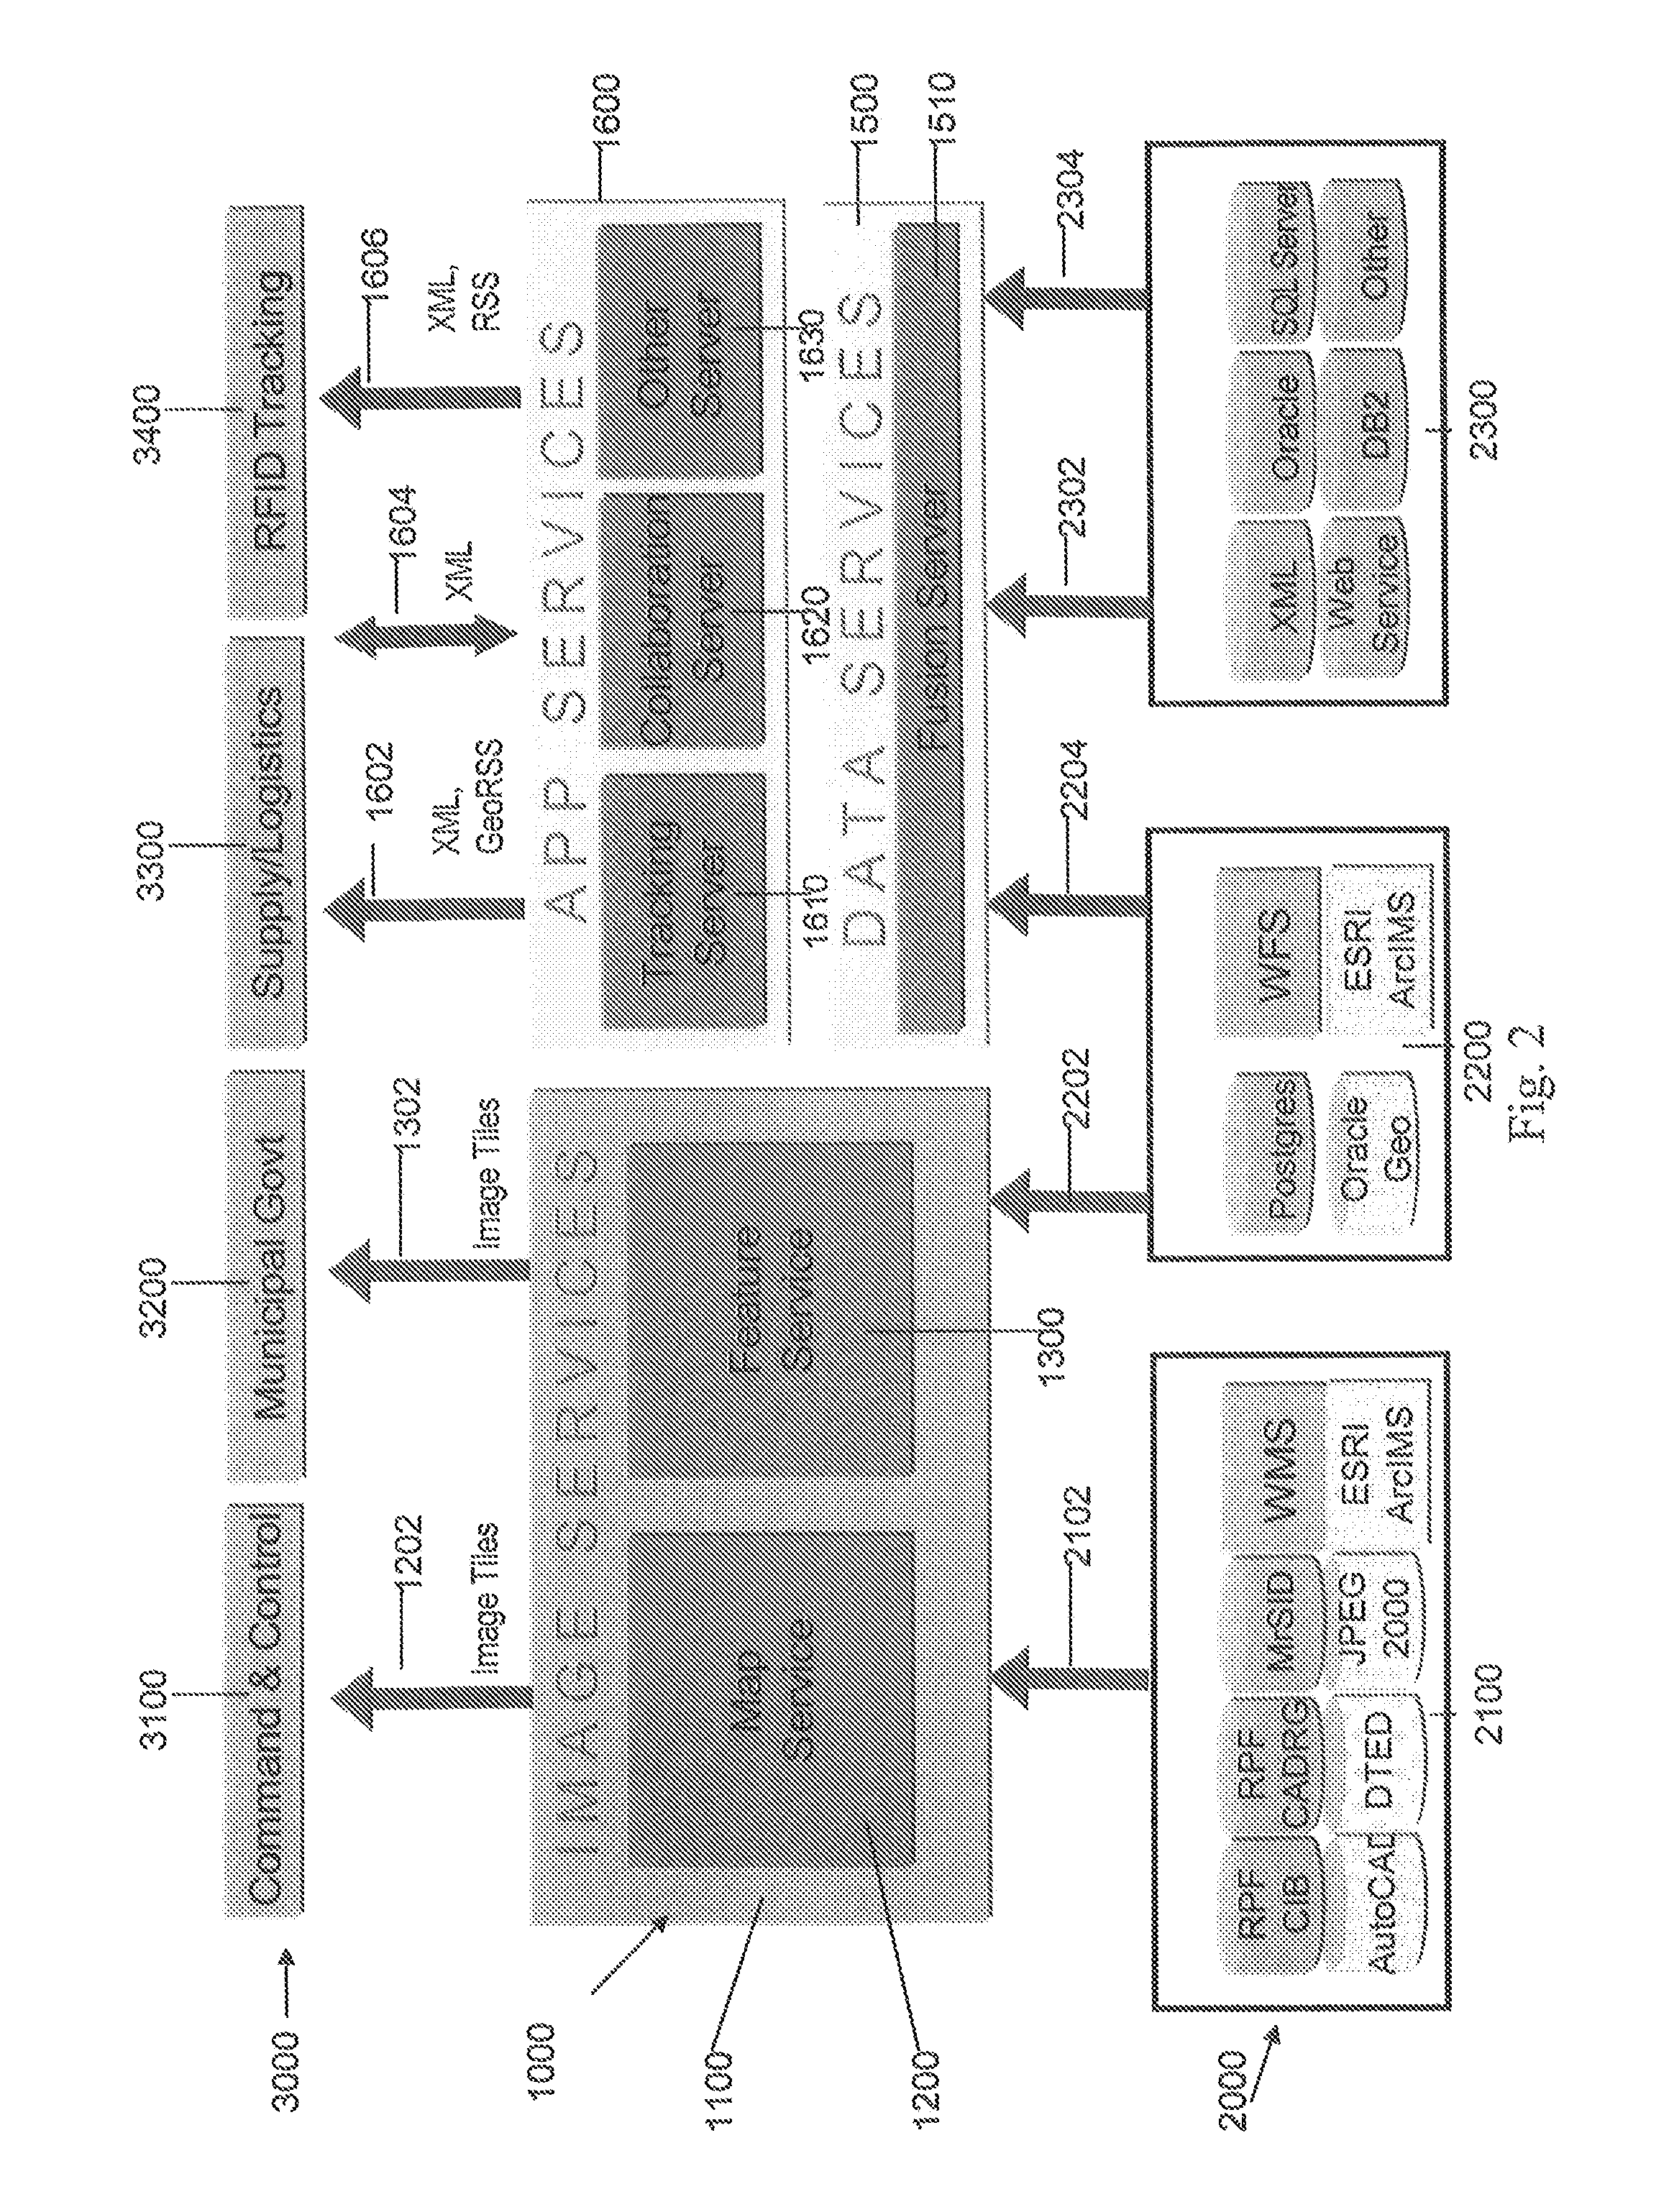 Server-based systems and methods for enabling interactive, collabortive thin- and no-client image-based applications